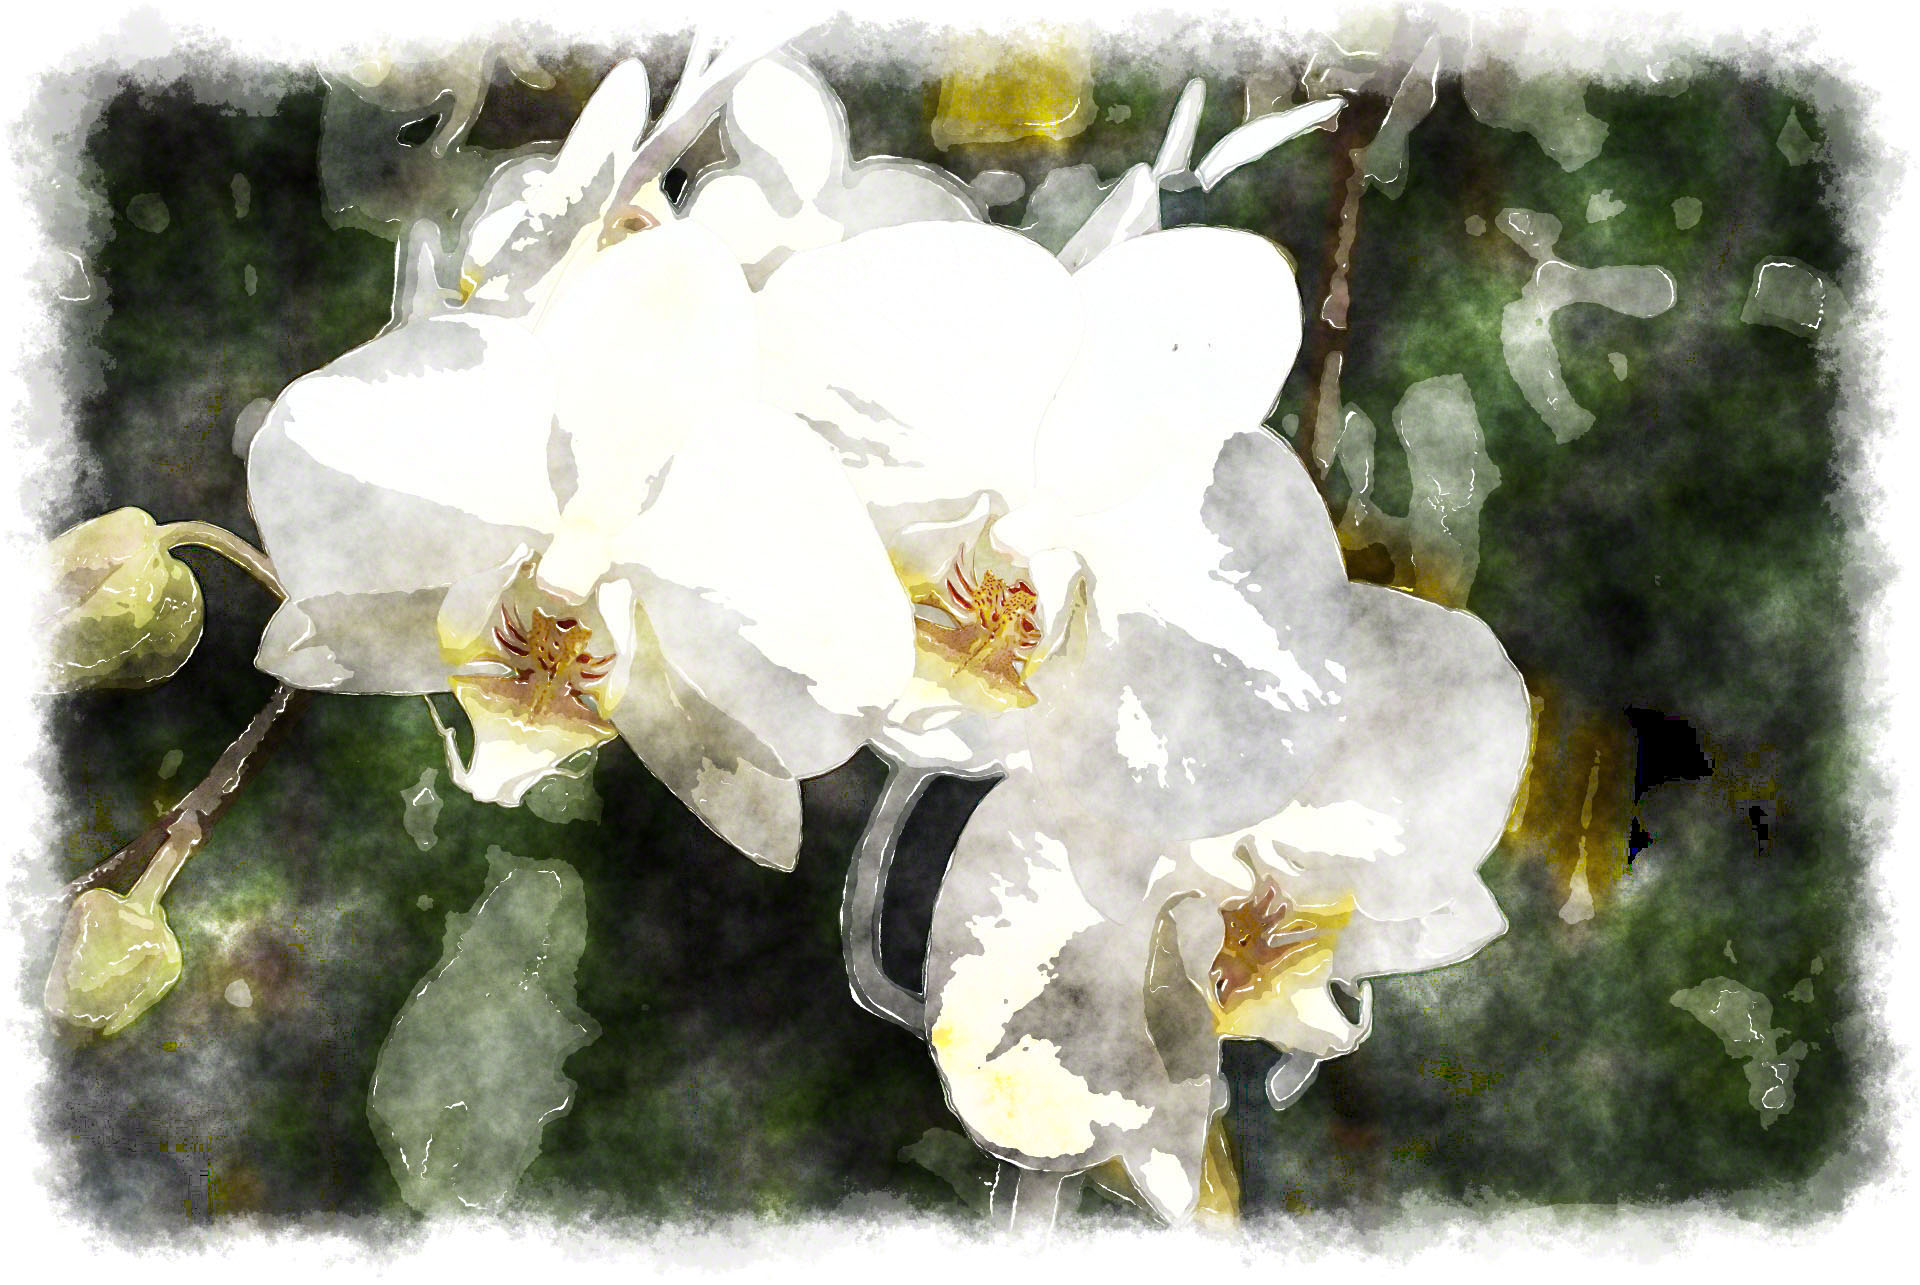 White Orchid Painting